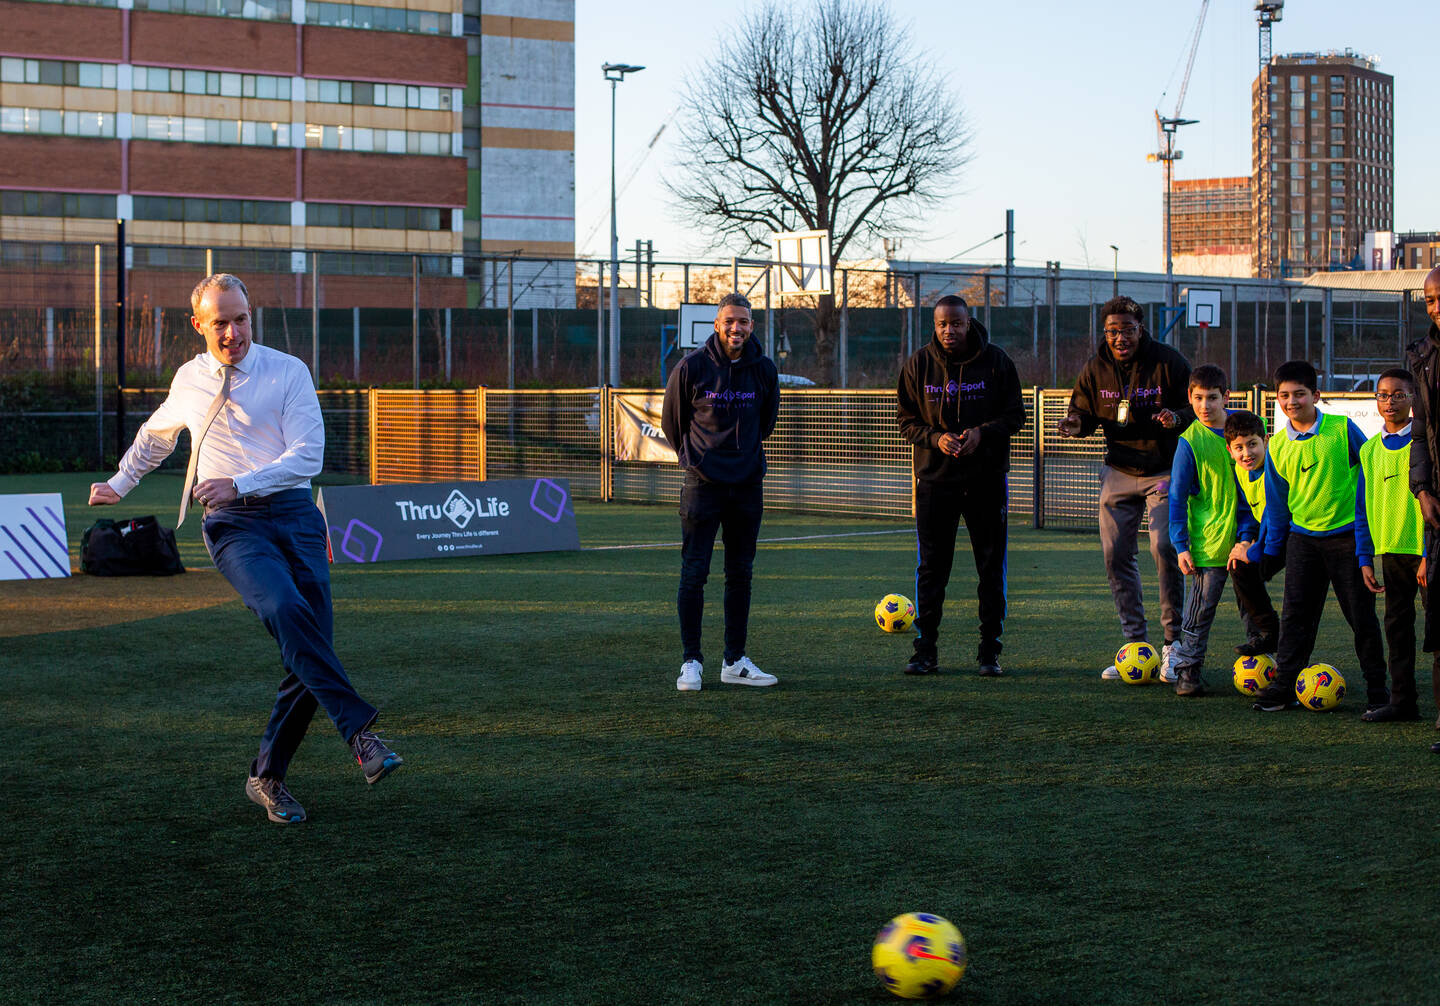 Deputy Prime Minister Dominic Raab in a shirt and tie kicks a ball as a group of coaches and children watch.